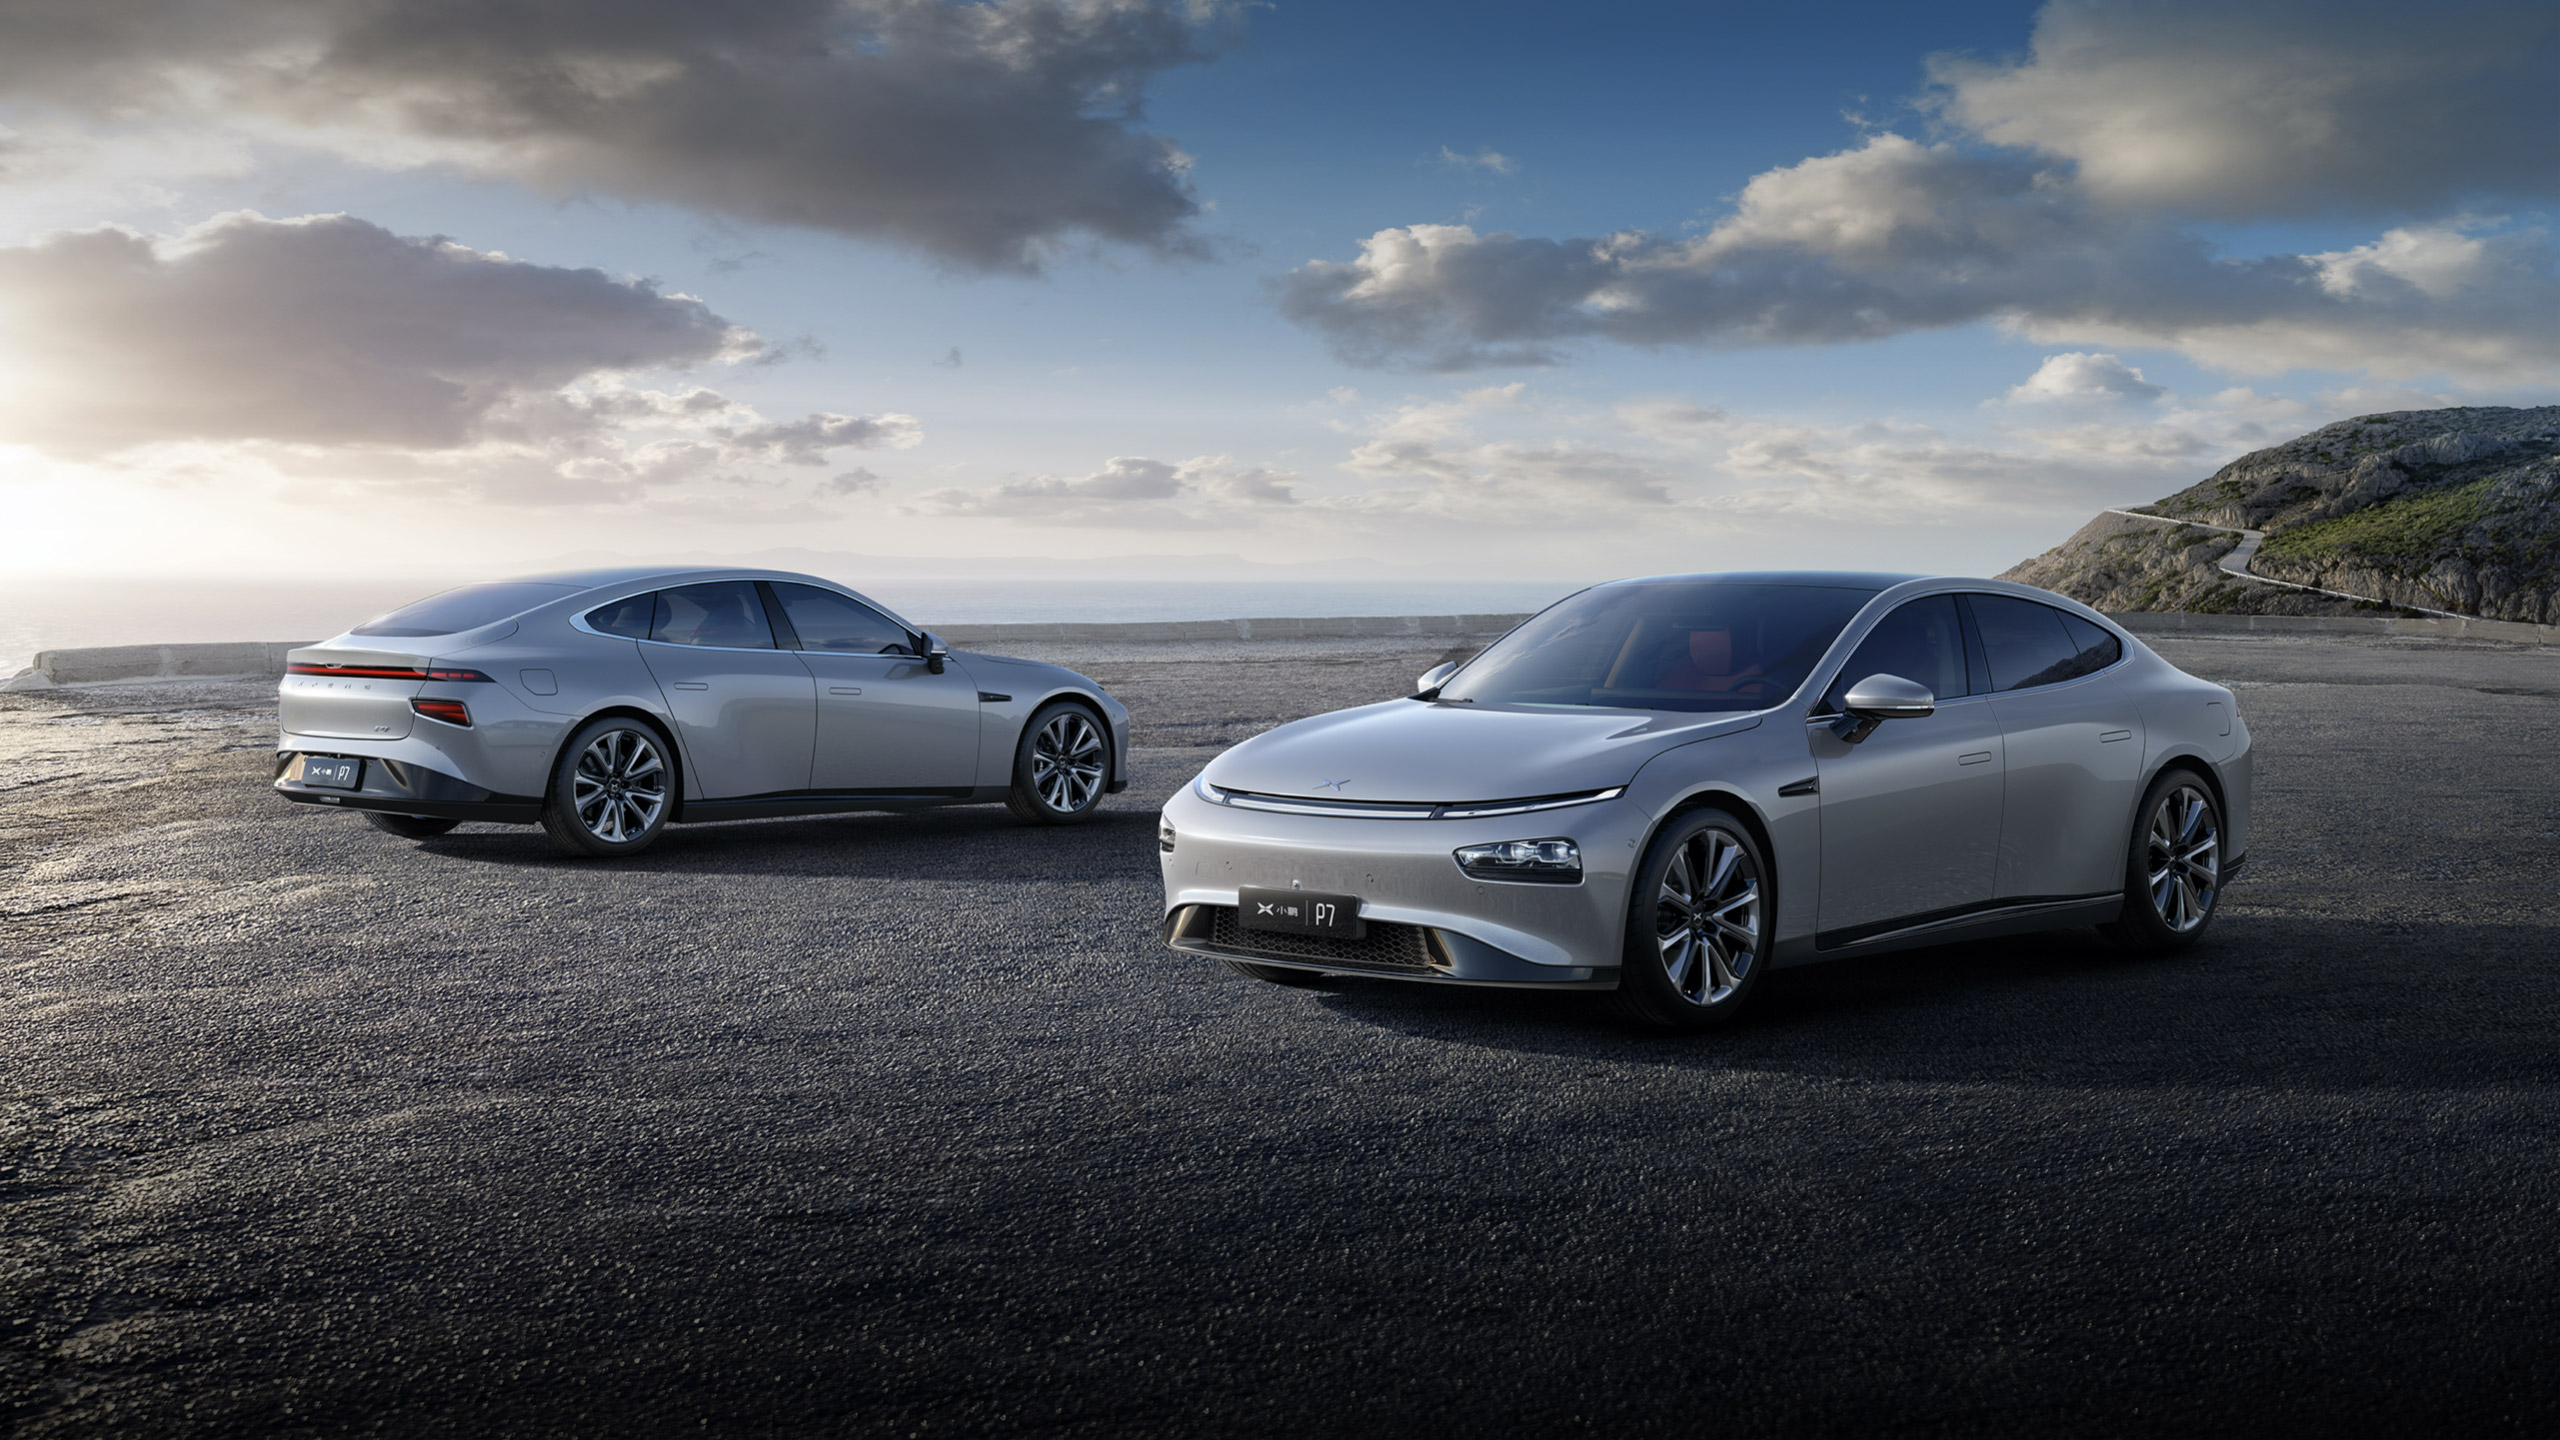 What's the difference between Xiaopeng Motors' battery rental program and NIO's BaaS?